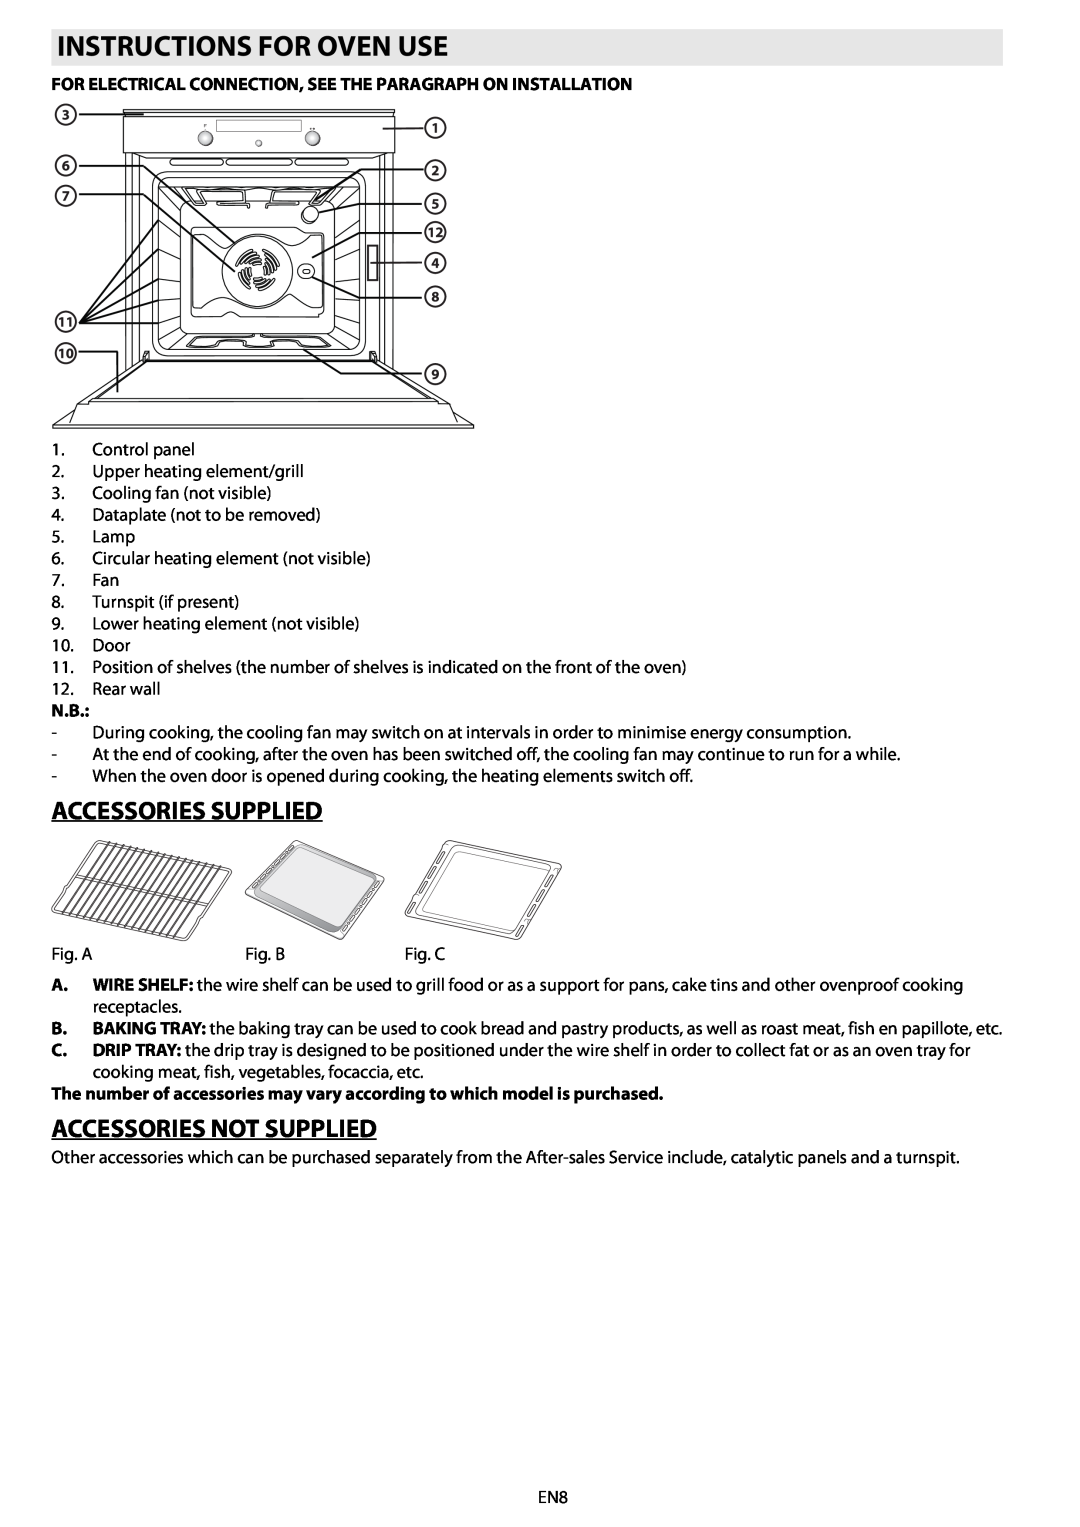 Whirlpool AKZ 562 manual Instructions For Oven Use, Accessories Supplied, Accessories Not Supplied 